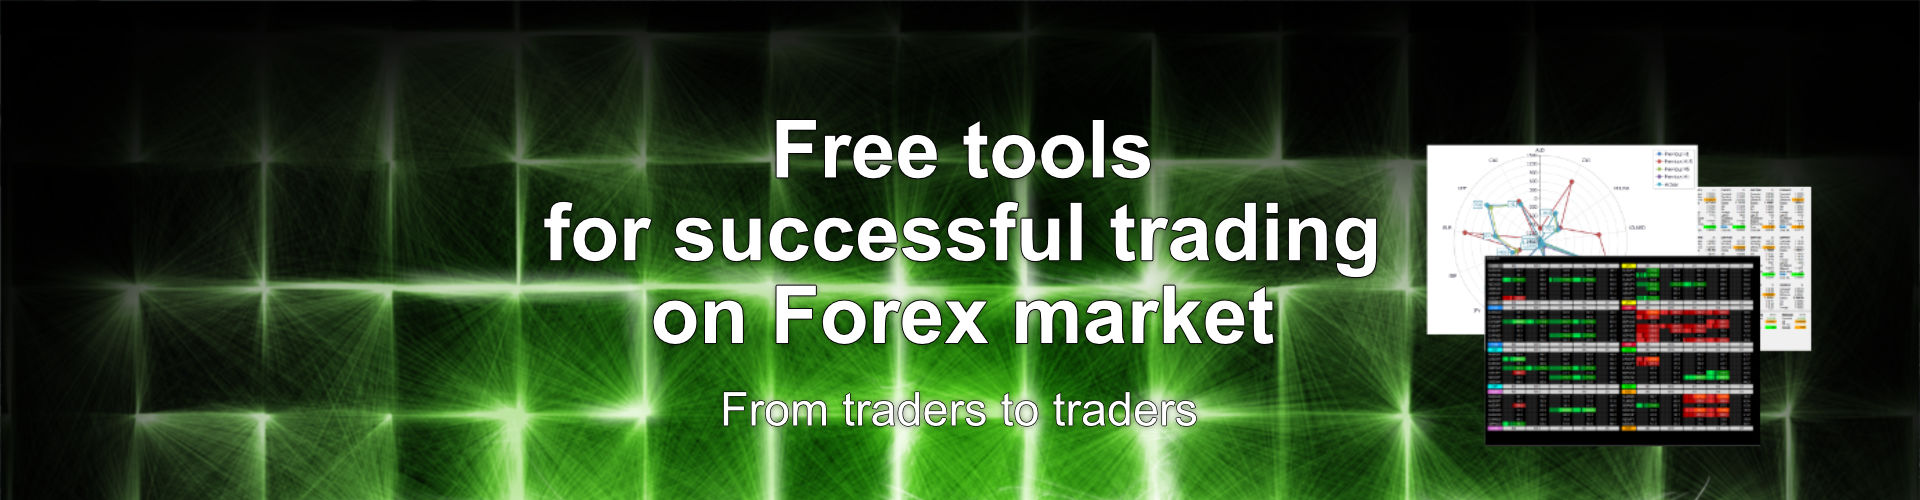 Free tools for successful trading on Forex market